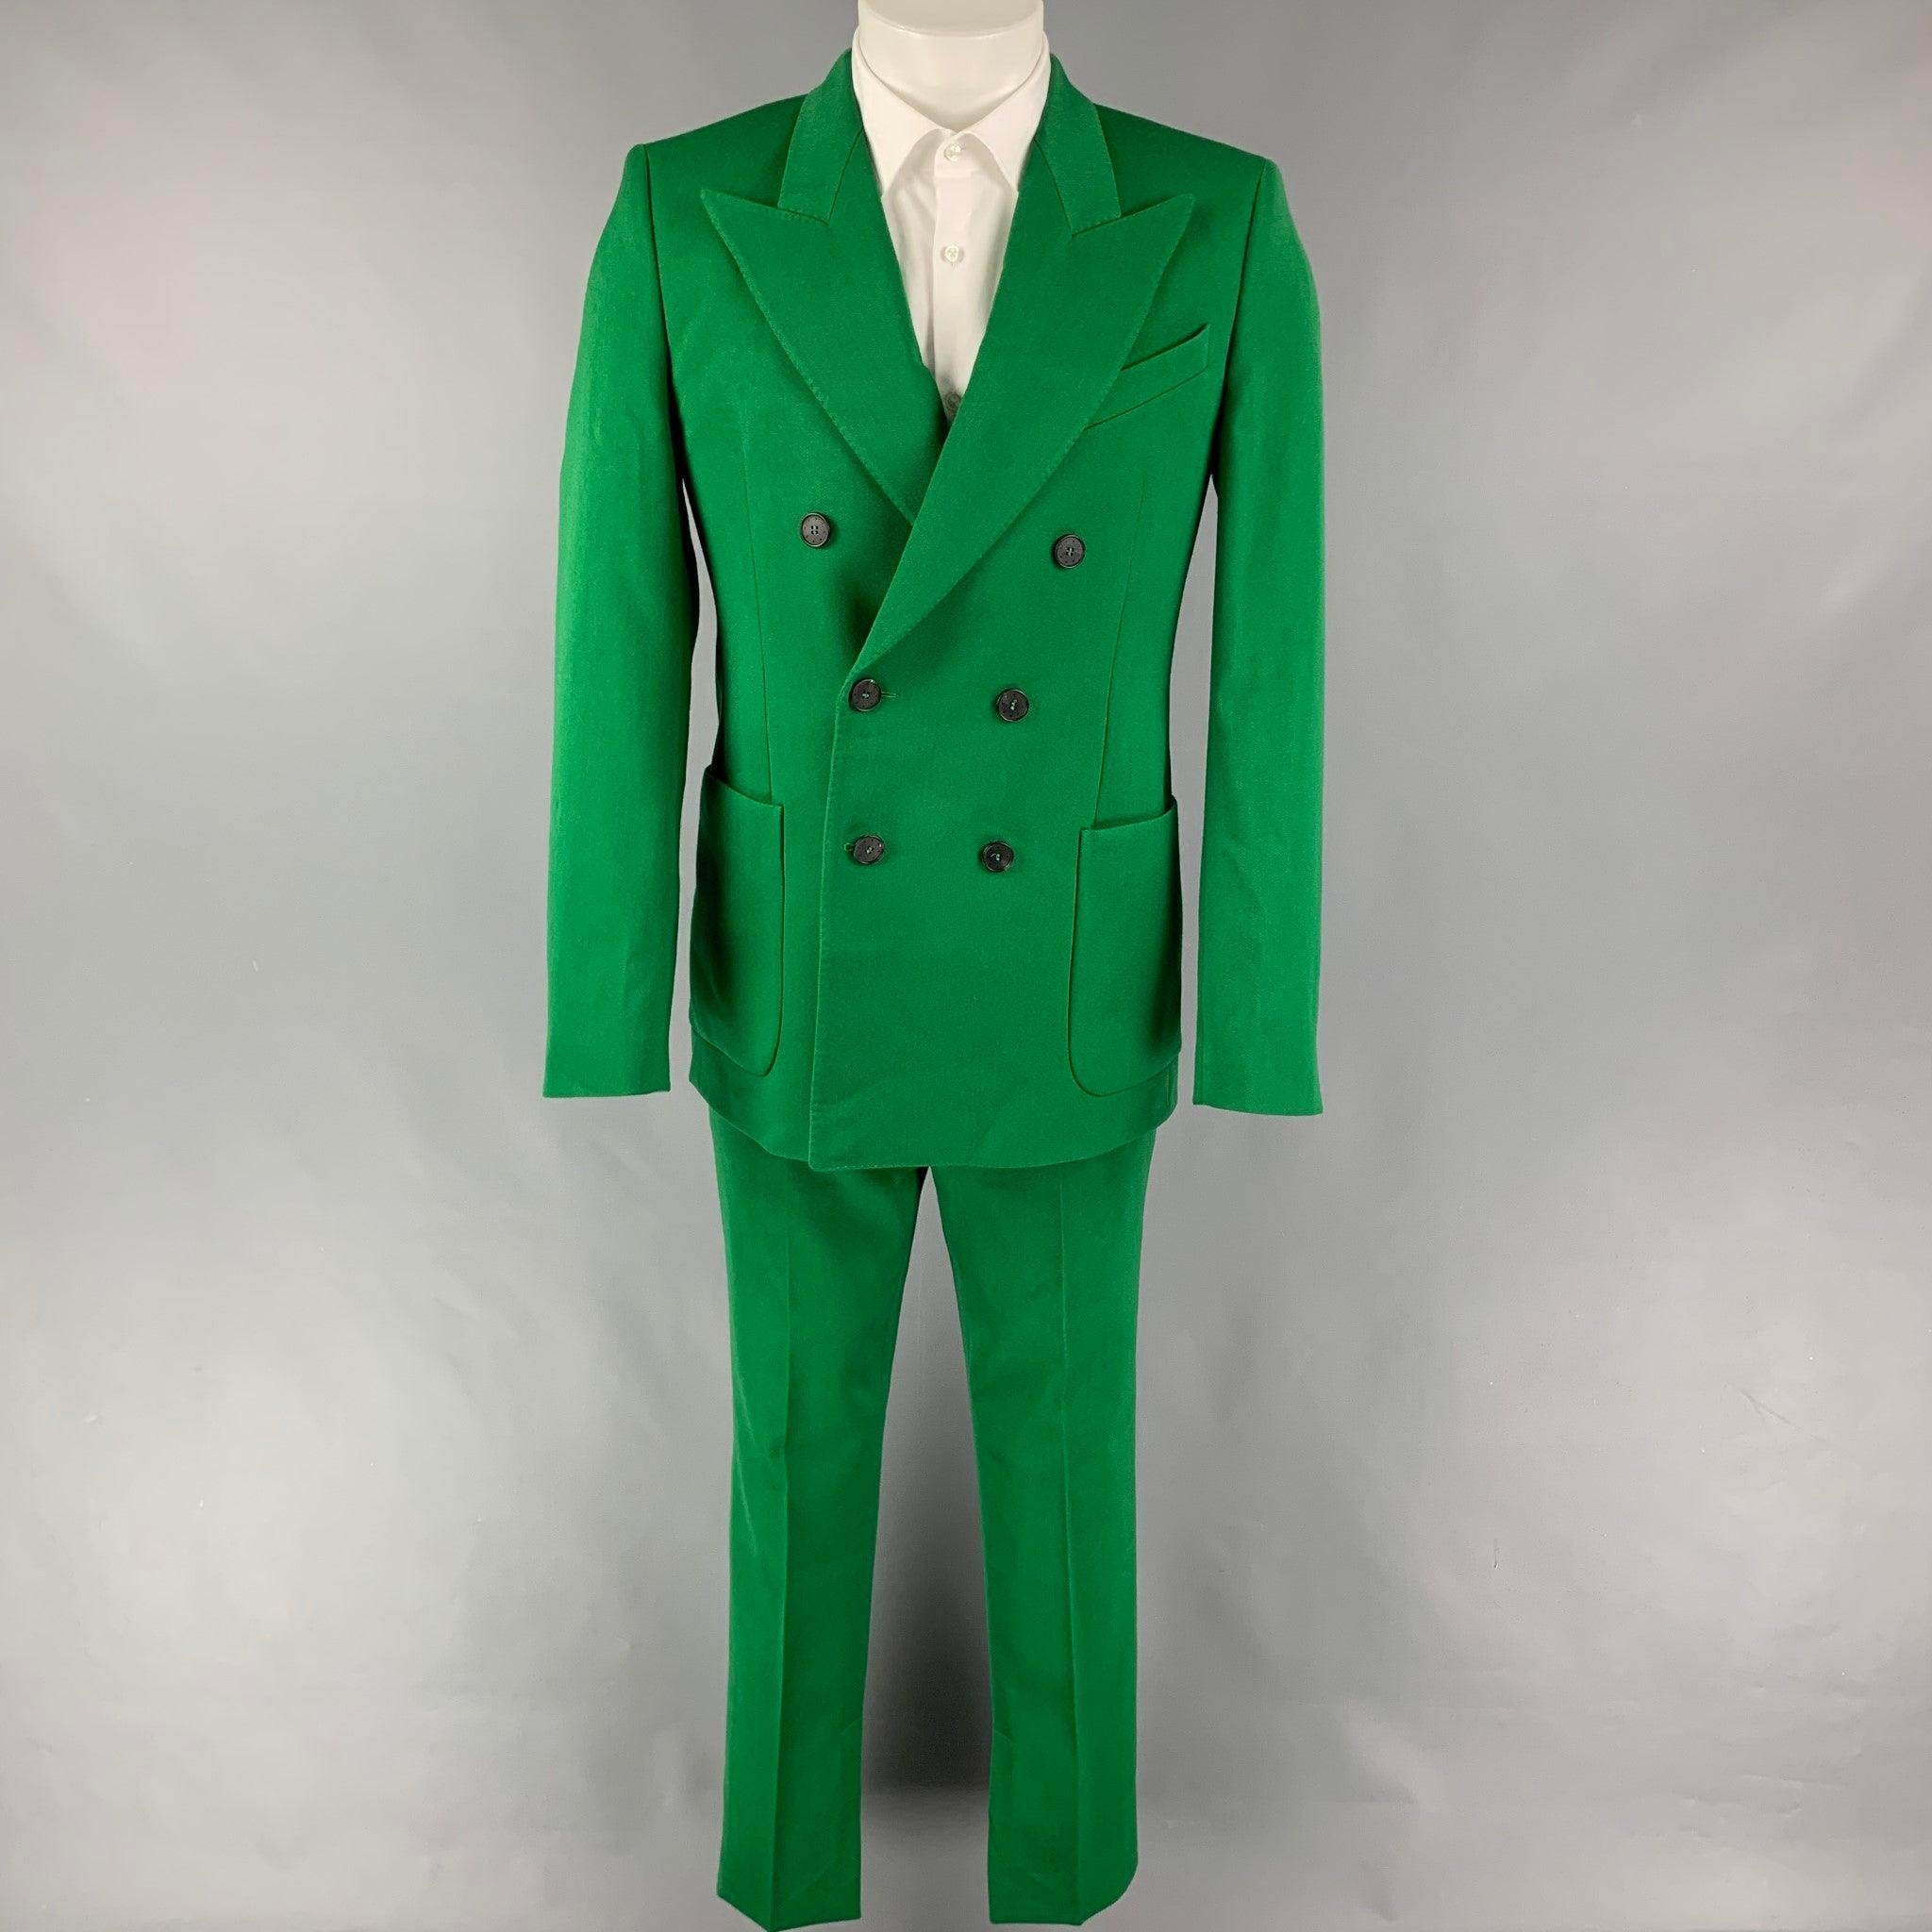 GIVENCHY Pre-Spring 2020
suit comes in a green polyester / wool with a half liner and includes a double breasted sport coat with a peak lapel and matching flat front trousers with slit cuffs. Made in Italy. Excellent Pre-Owned Condition. 

Marked:  